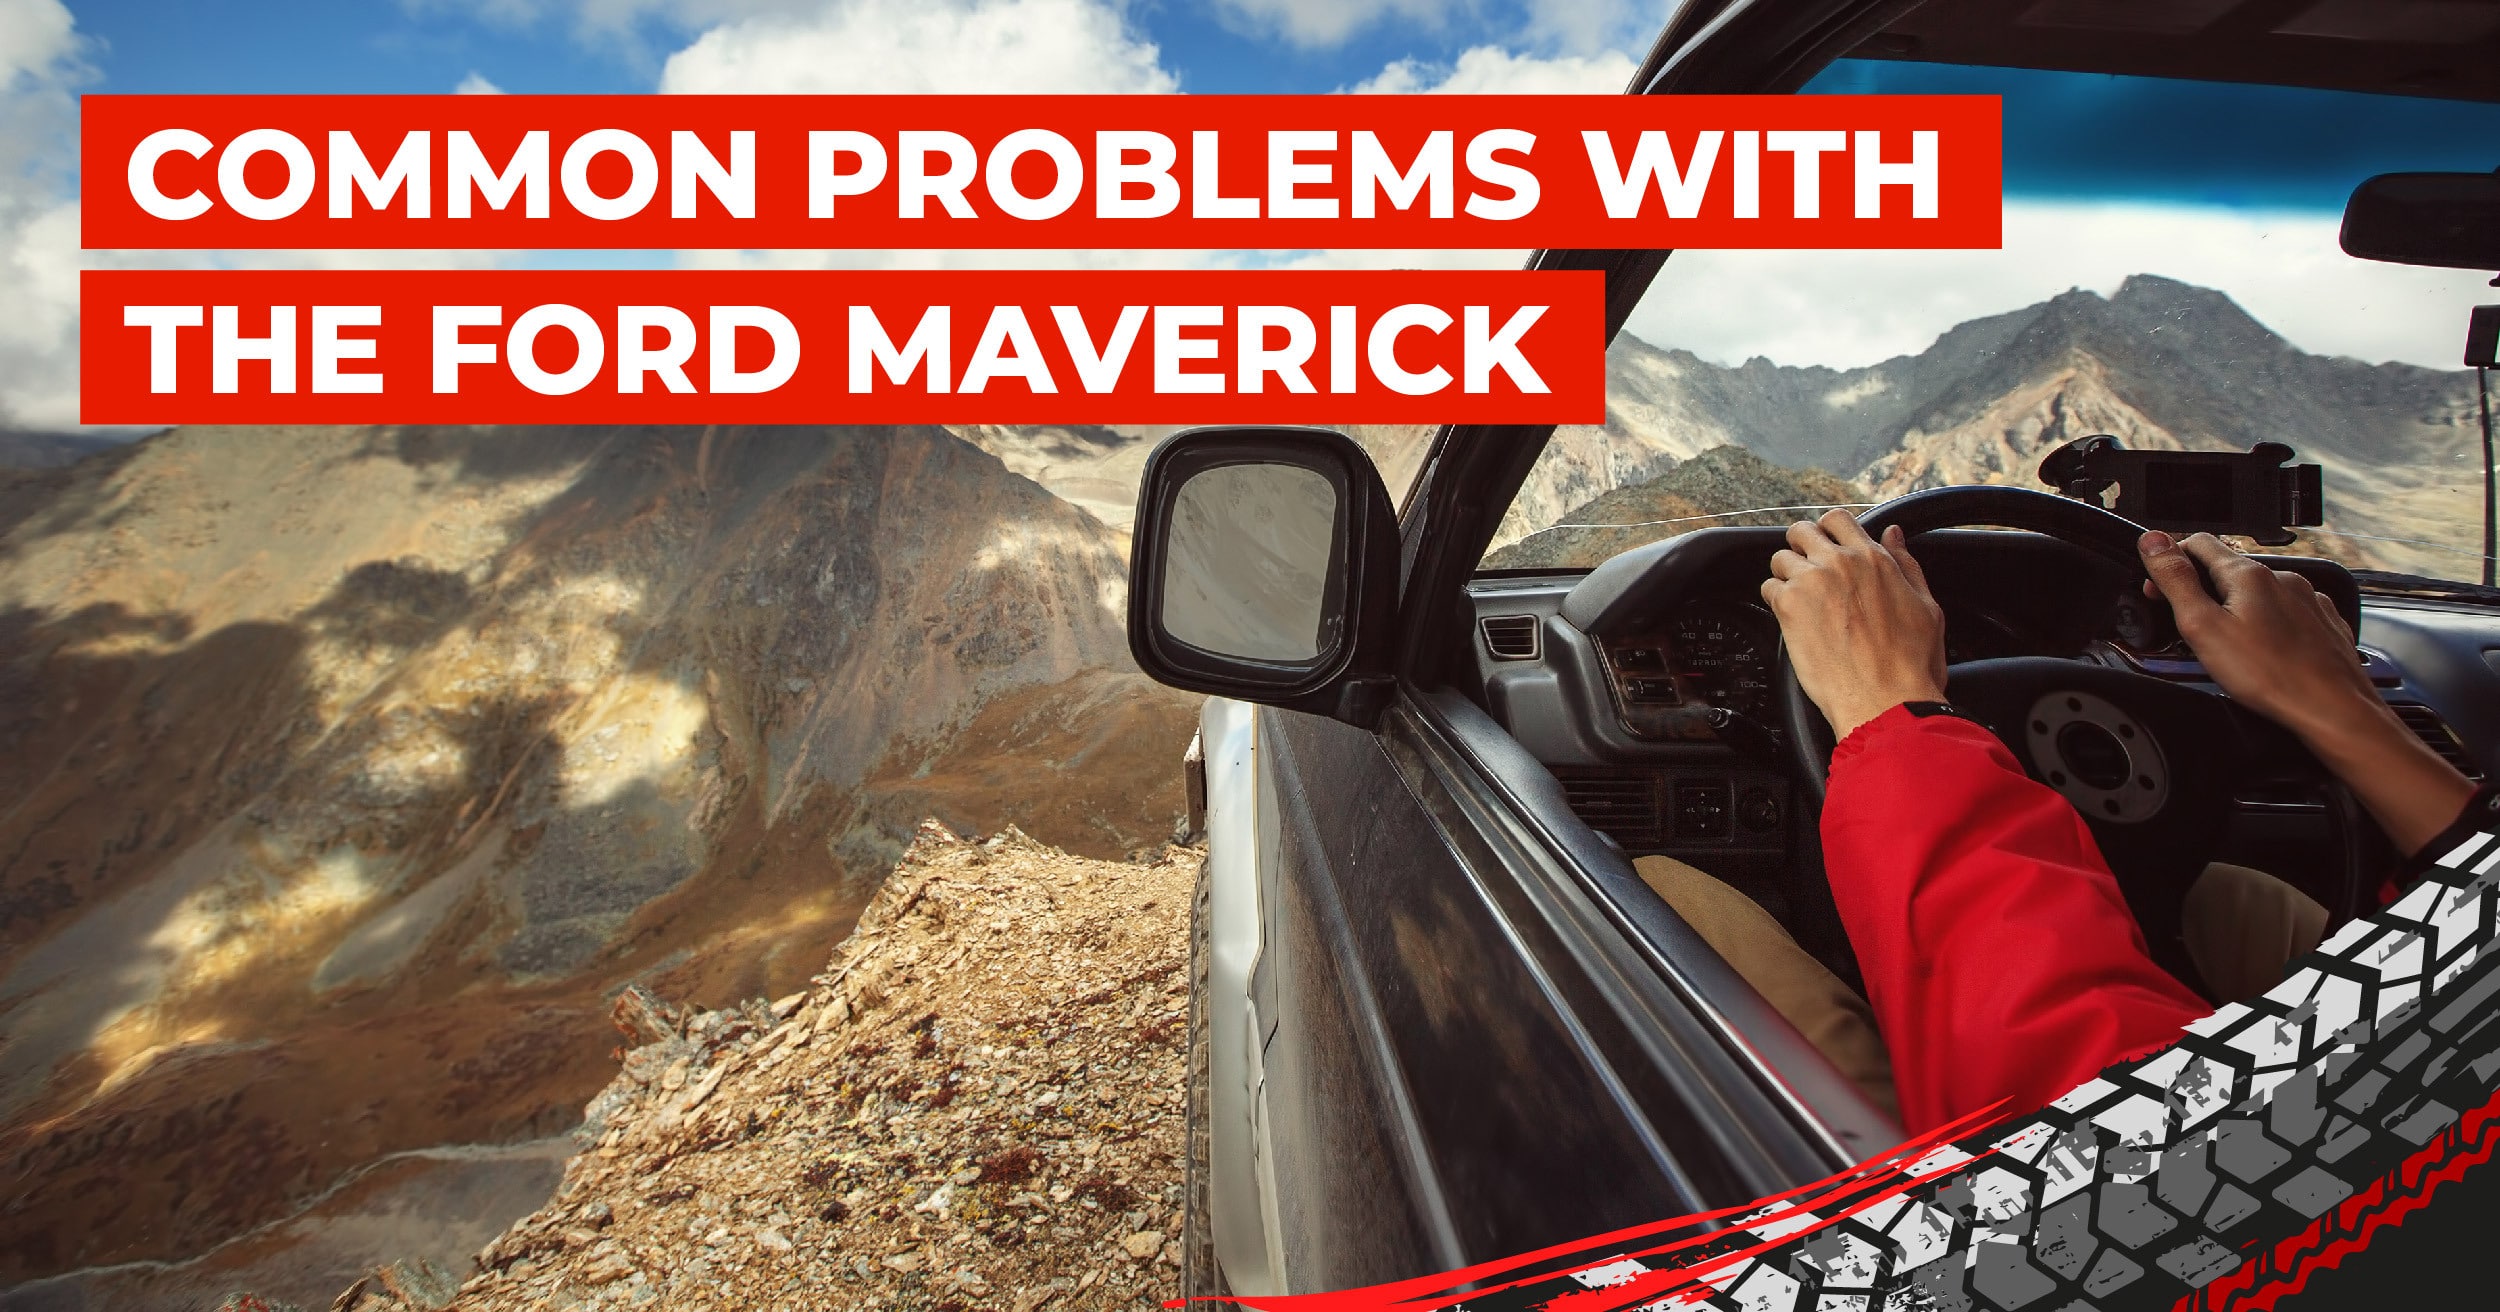 Common Problems With the Ford Maverick